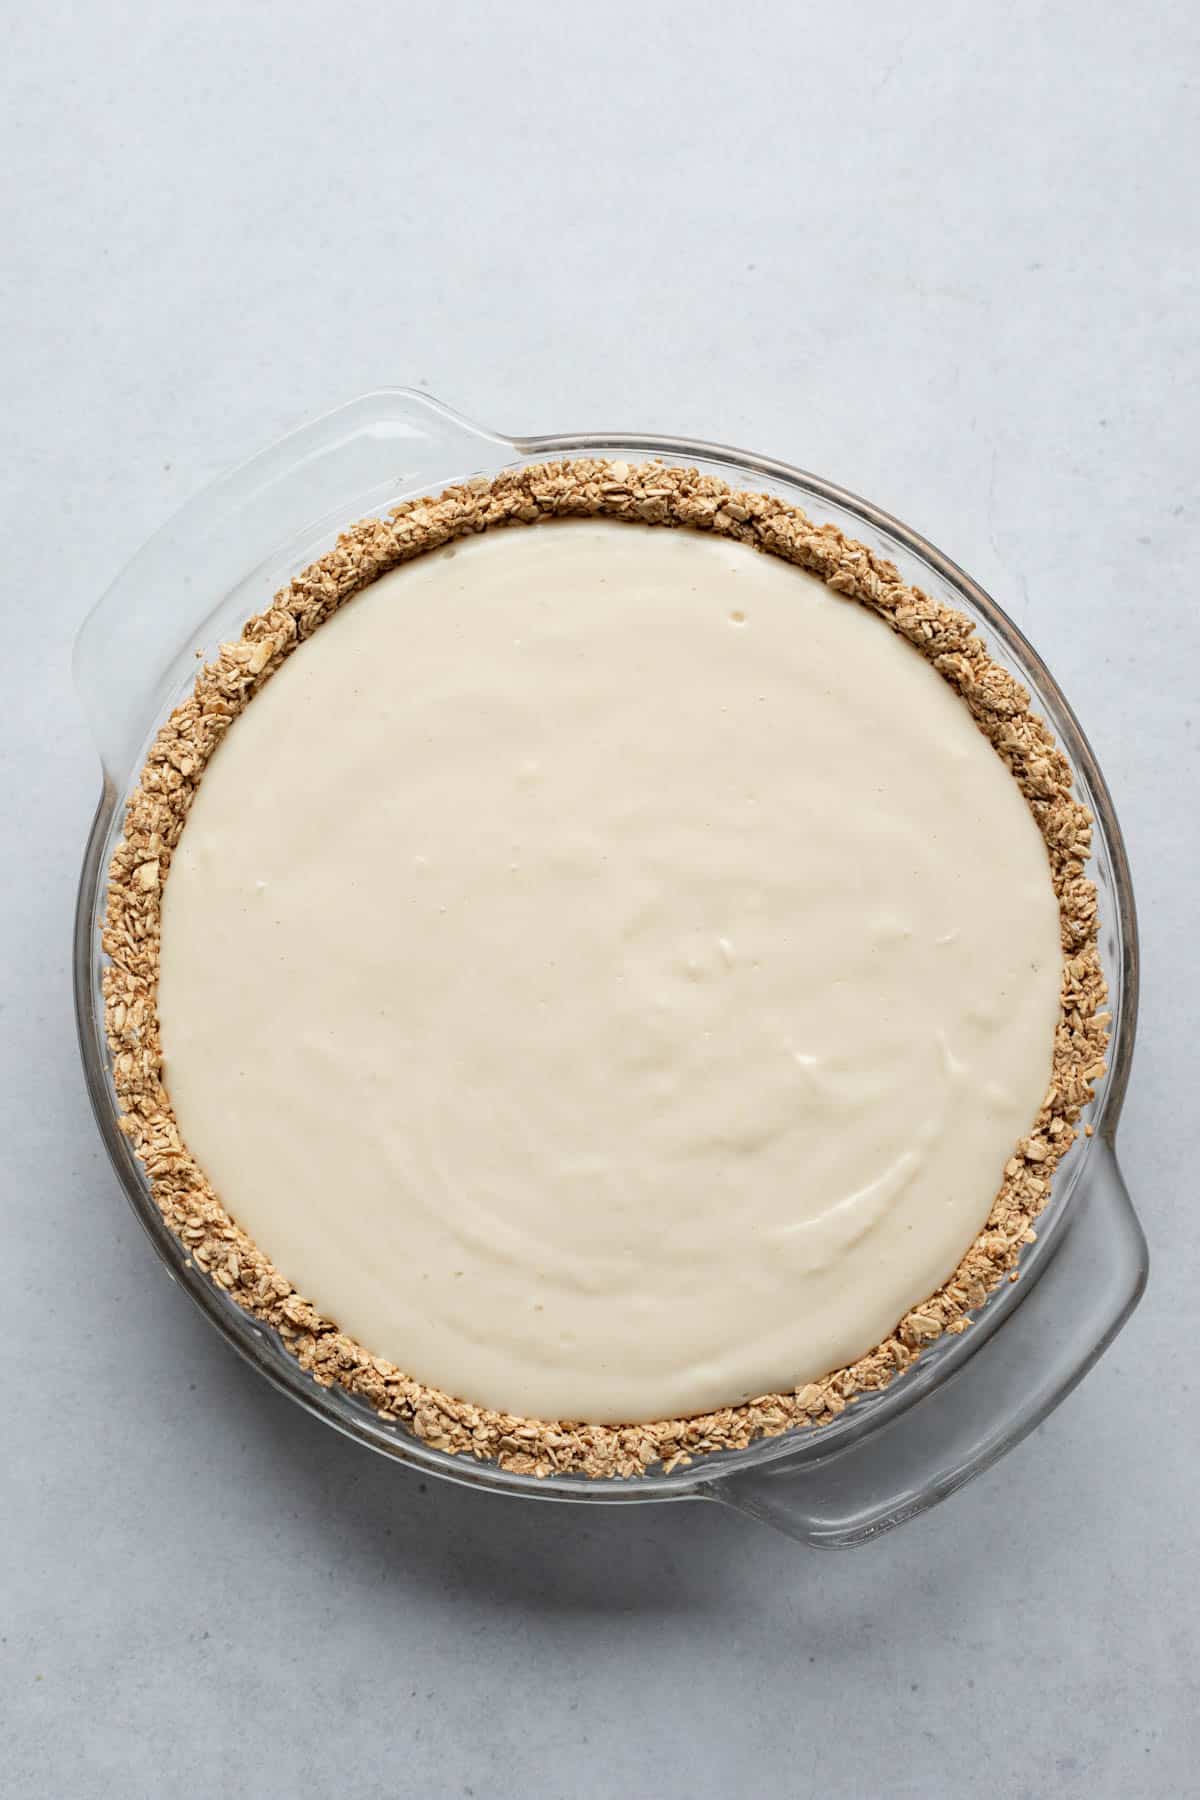 Blended tofu filling poured into a pre-baked oatmeal pie crust.